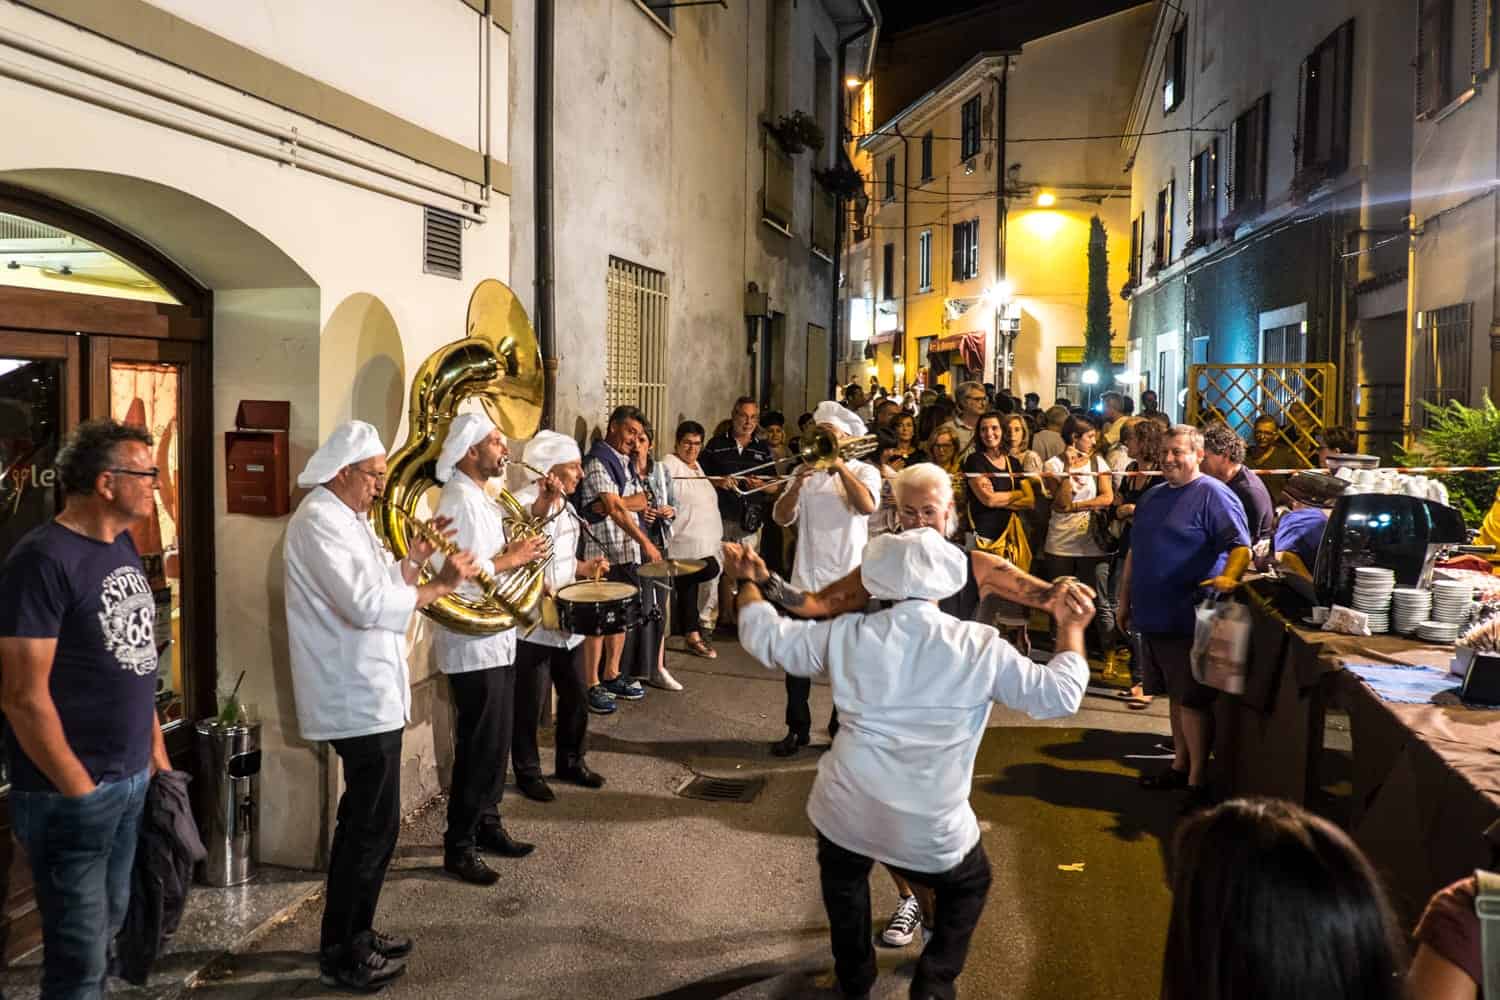 The celebration of food with music and dance at Festa Artusiana in Forlimpopoli, Italy